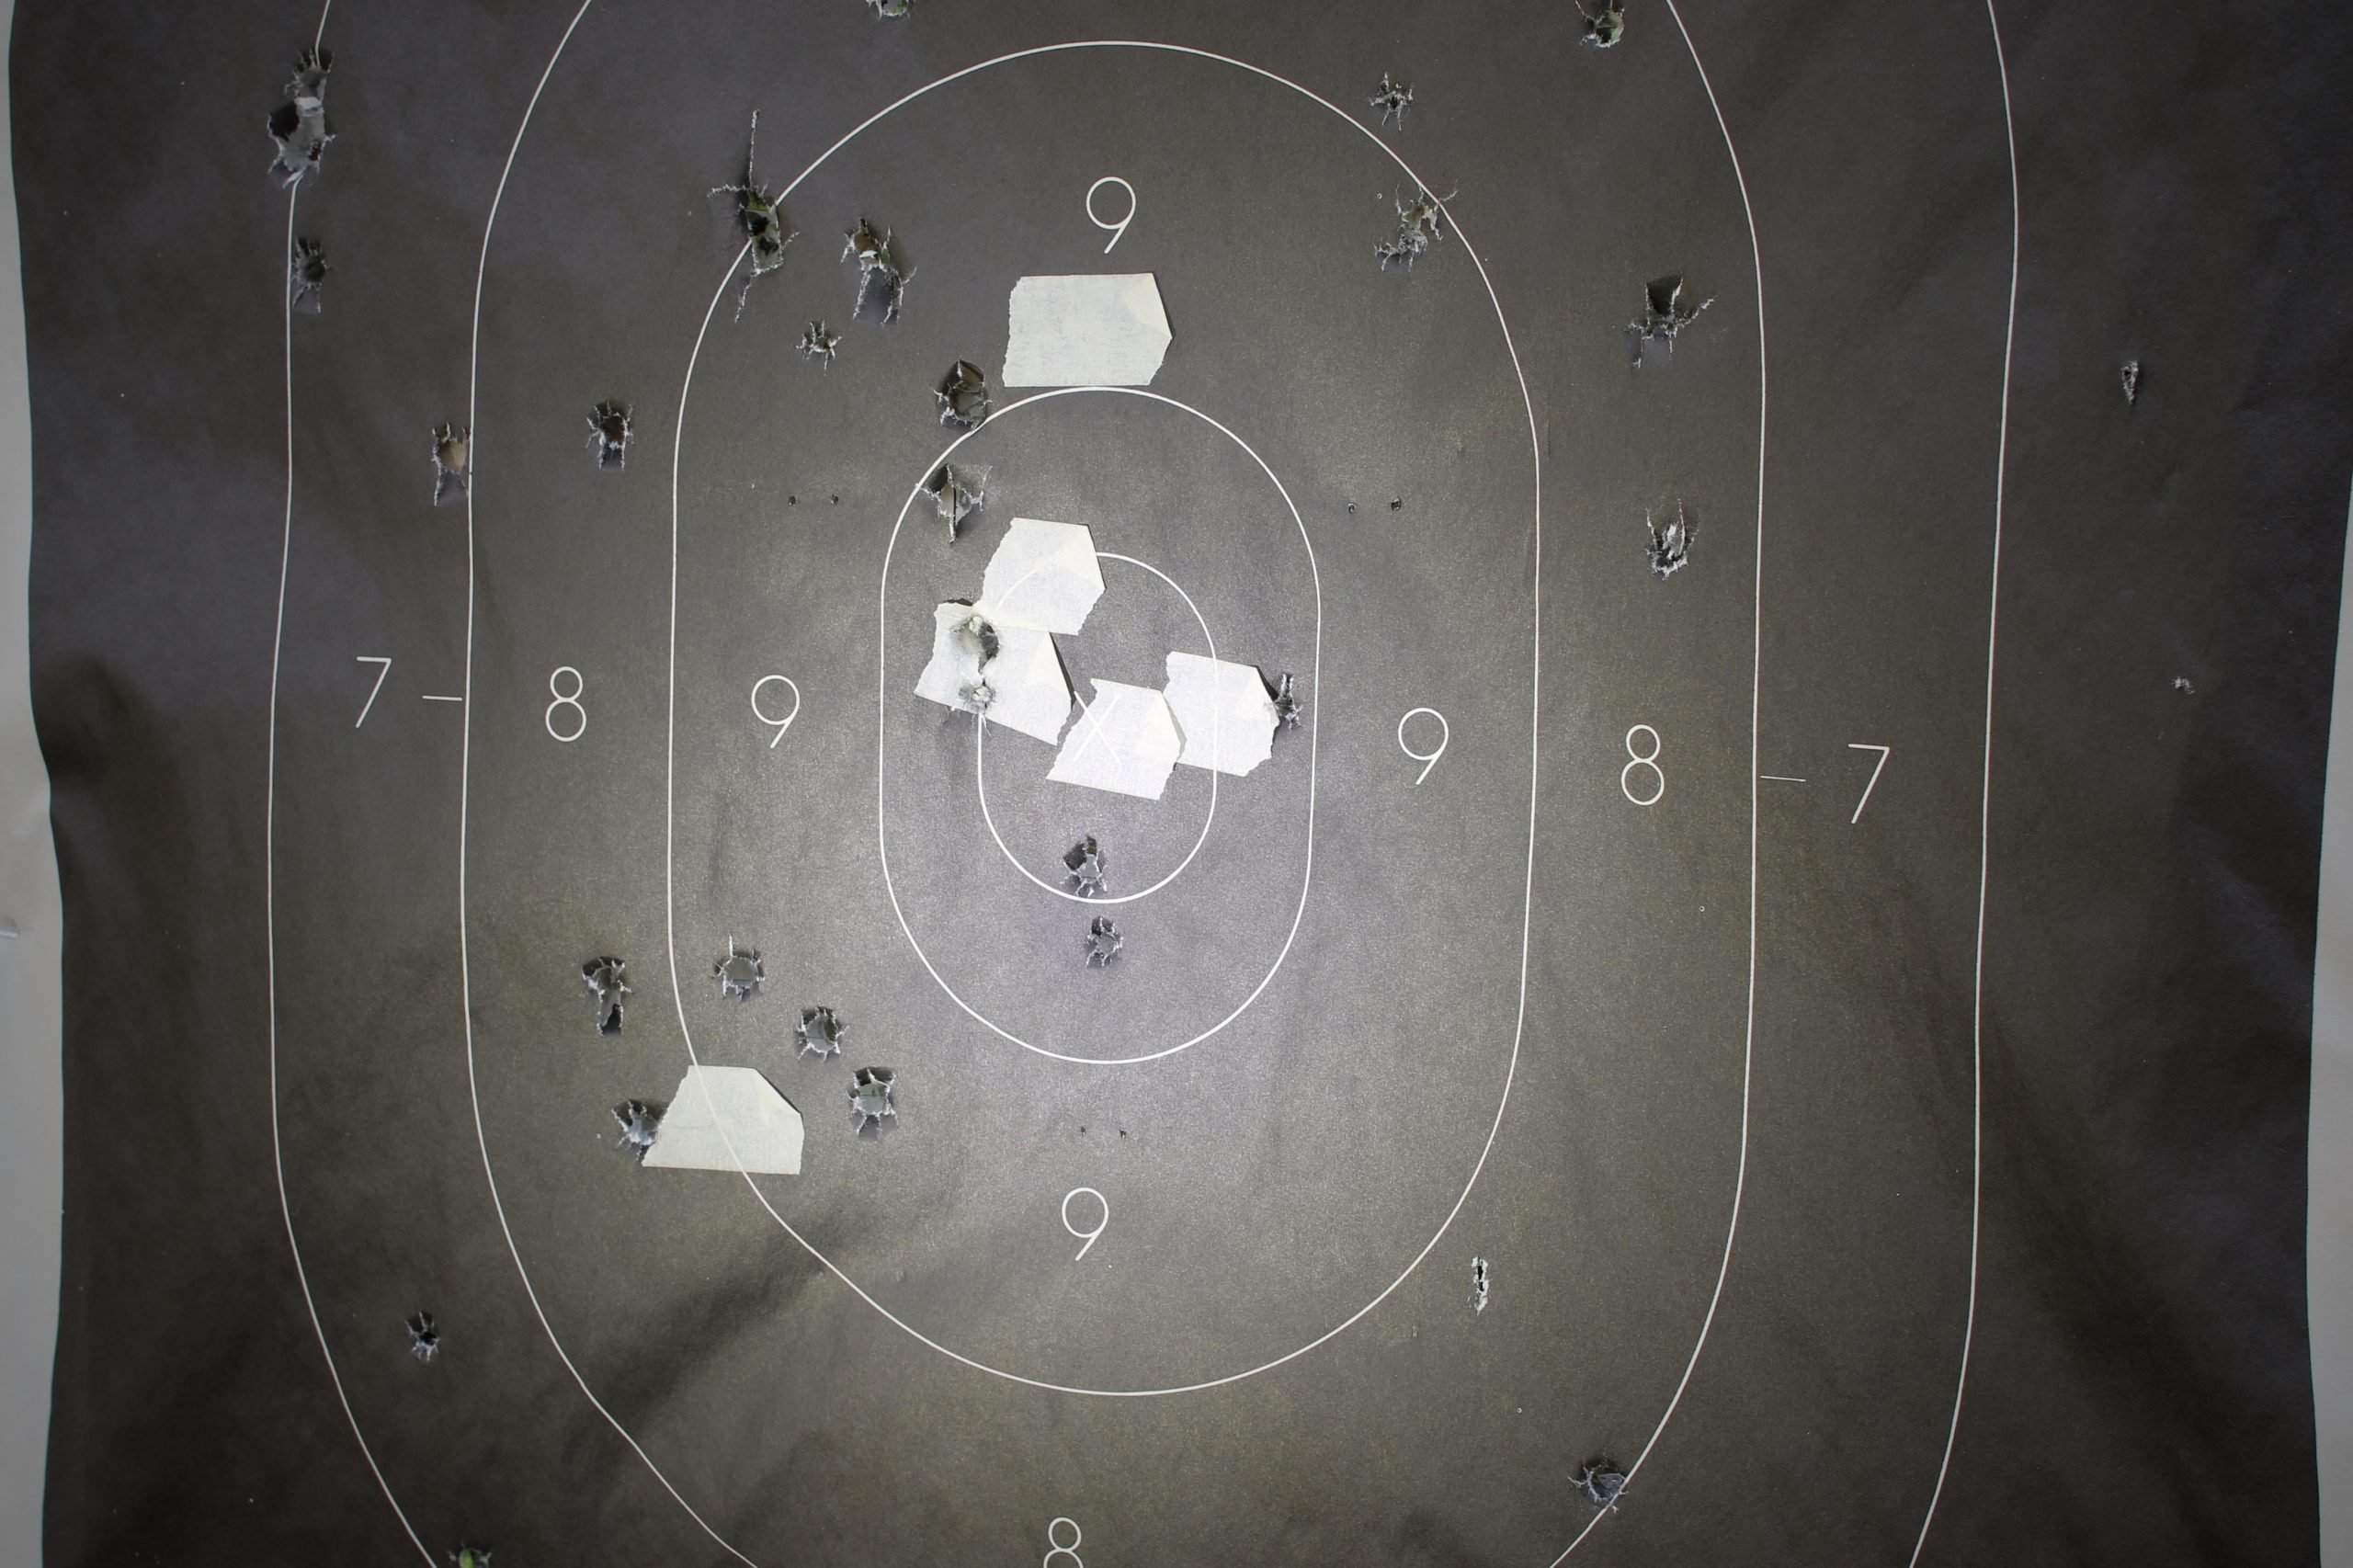 The center cone of the TWM-30 isn't going to get you on target, but it can be used to speed up target acquisition. 